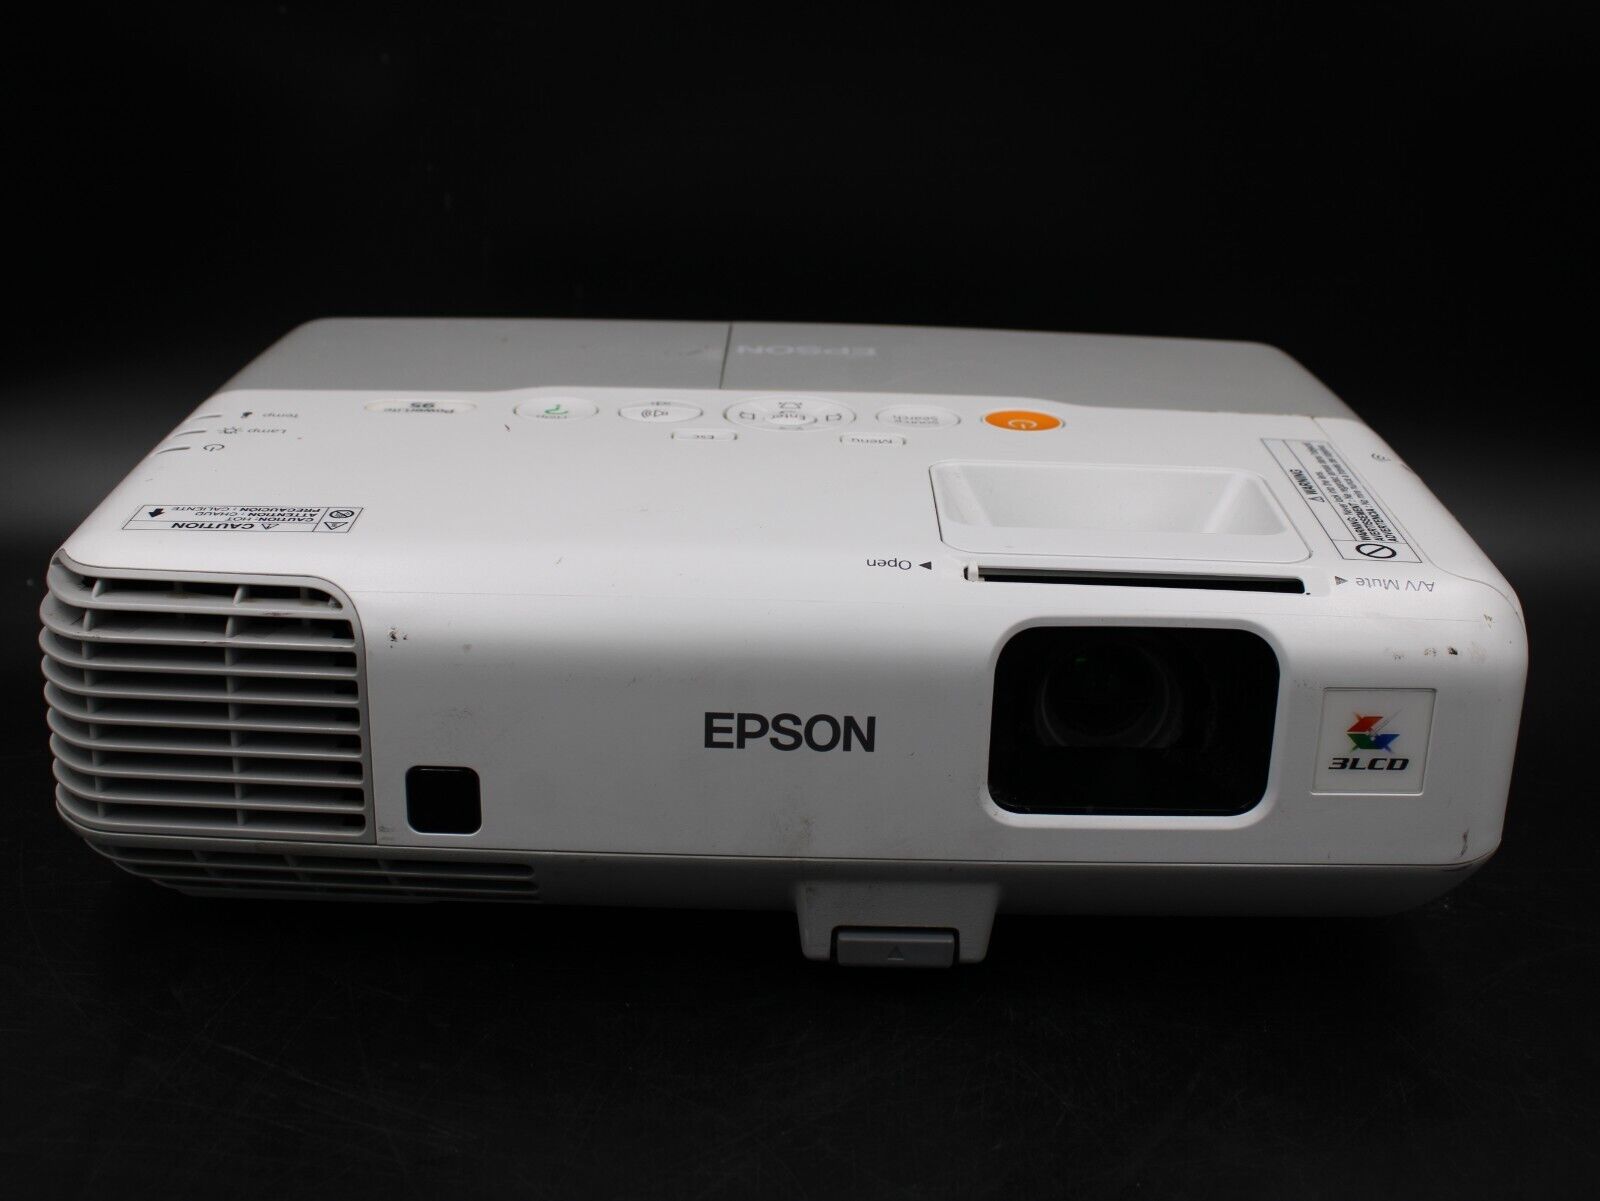 Epson Powerlite 95 XGA 3LCD HDMI Projector 1000-1999 Lamp Hours TESTED